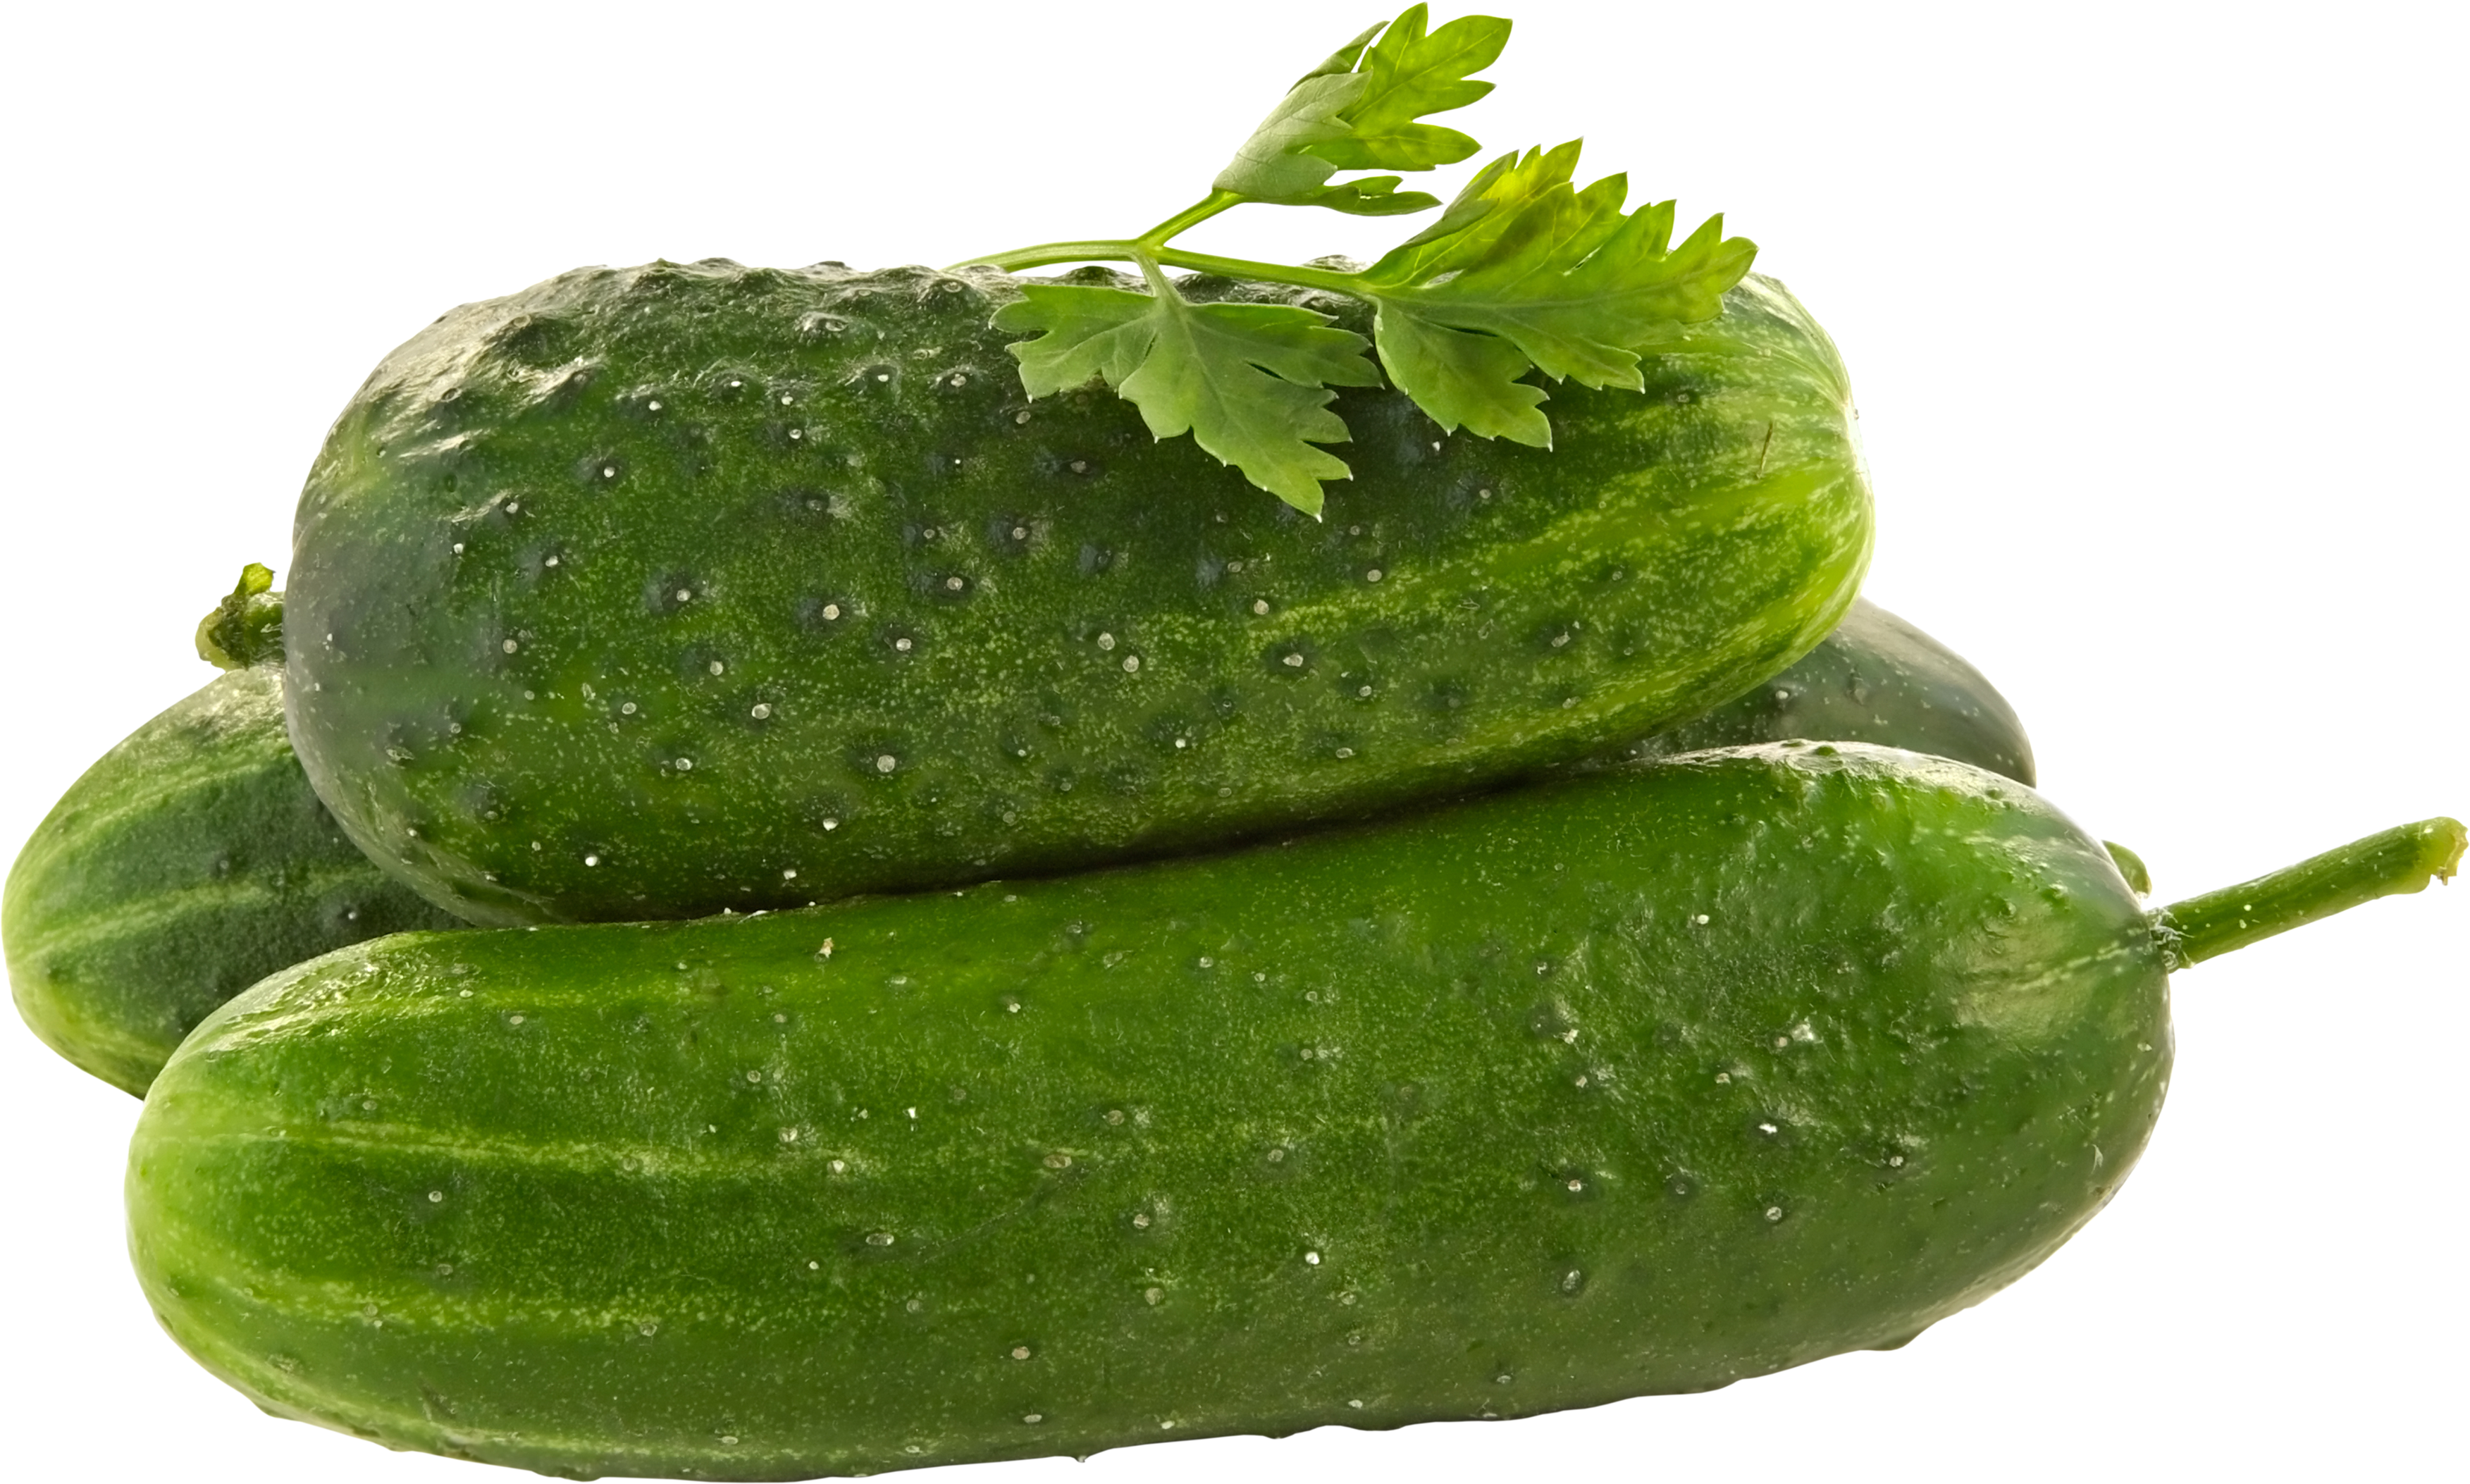 Free Download Of Cucumber Png Image - Cucumber, Transparent background PNG HD thumbnail